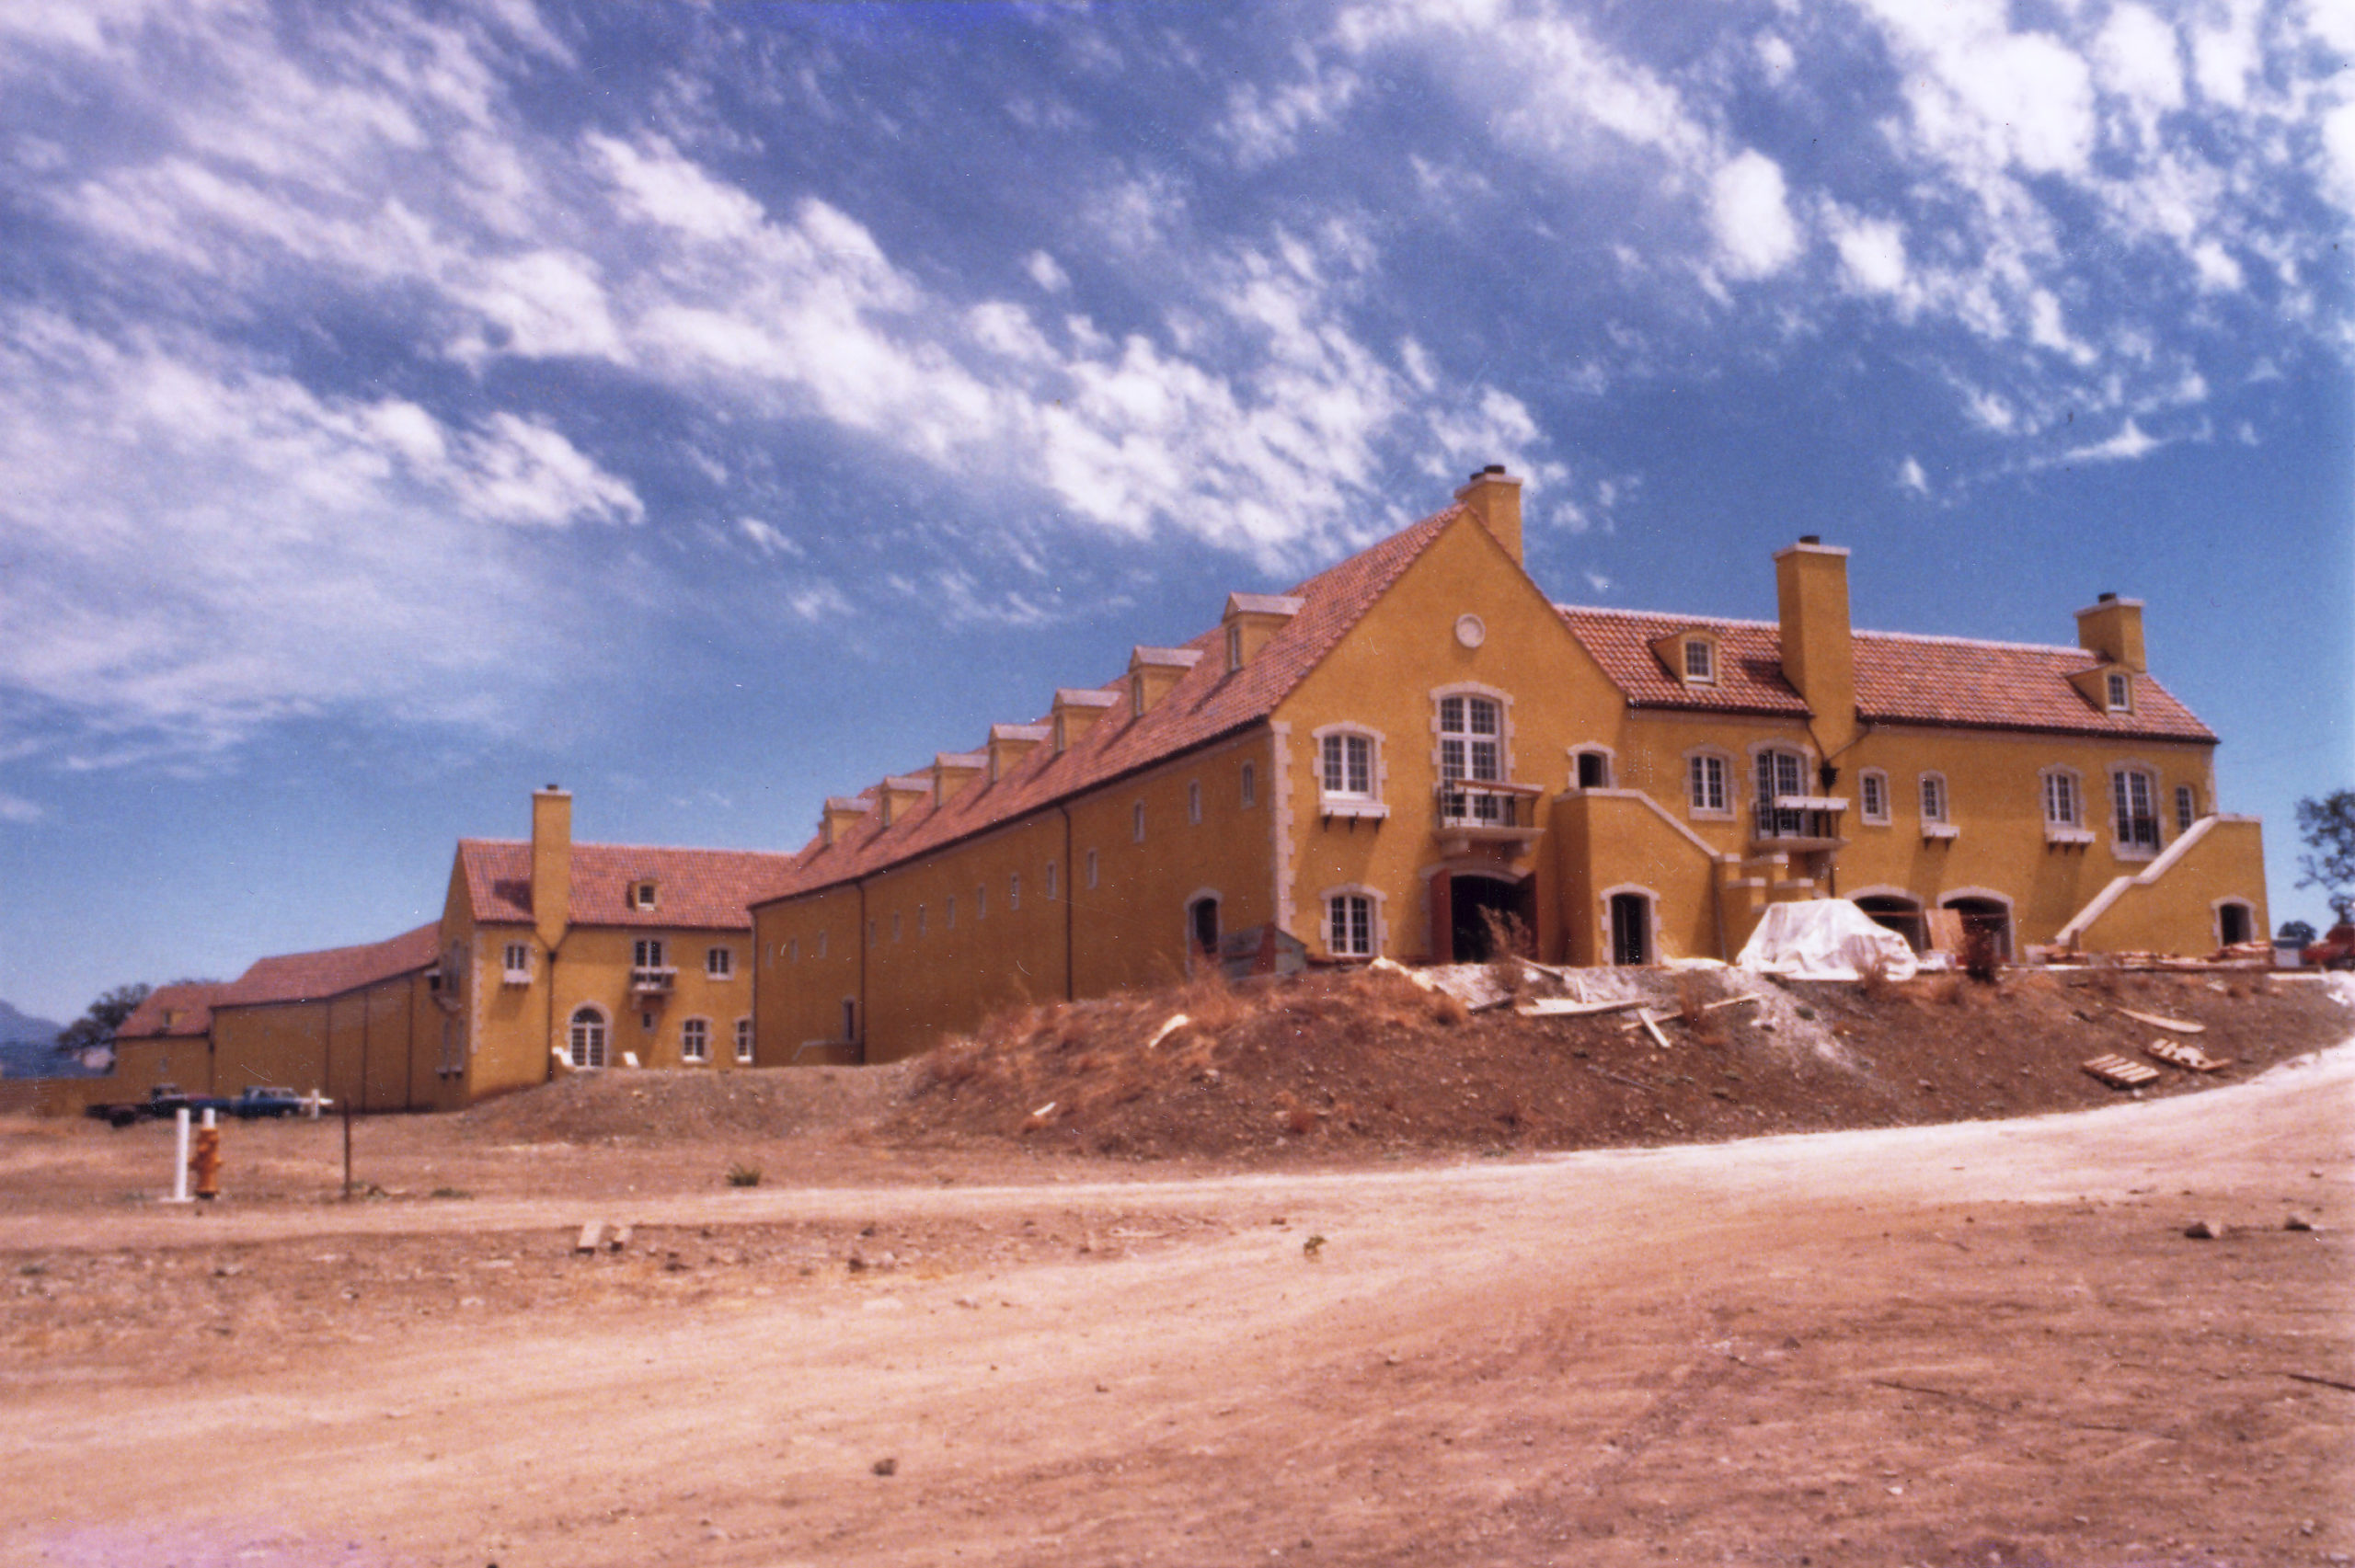 Jordan Winery Chateau during construction